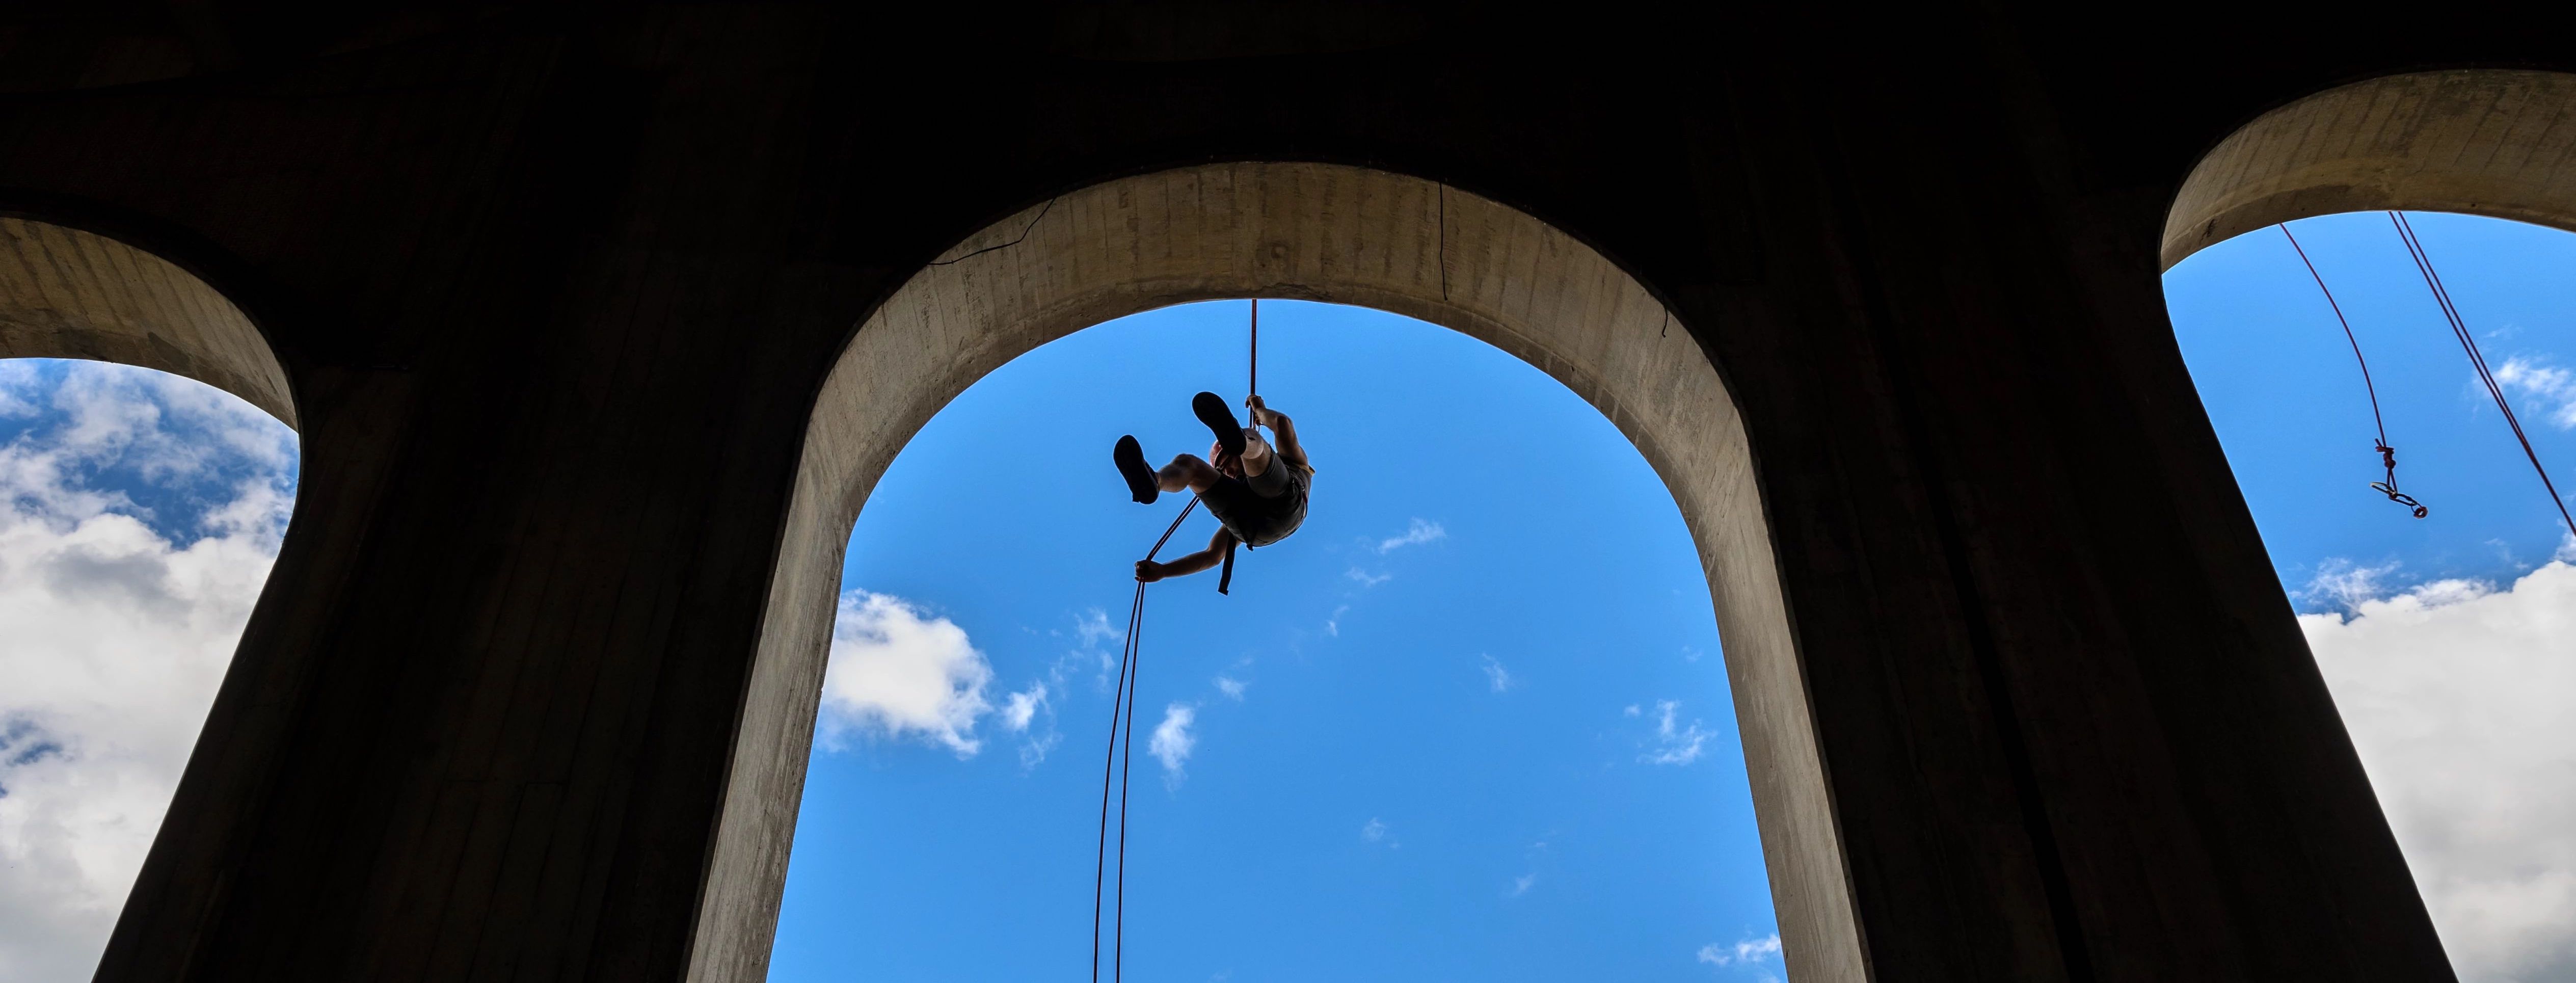 blue sky and three archways with a person rappel down a rope in the center arch off of Cornell's Schoellkopf Stadium